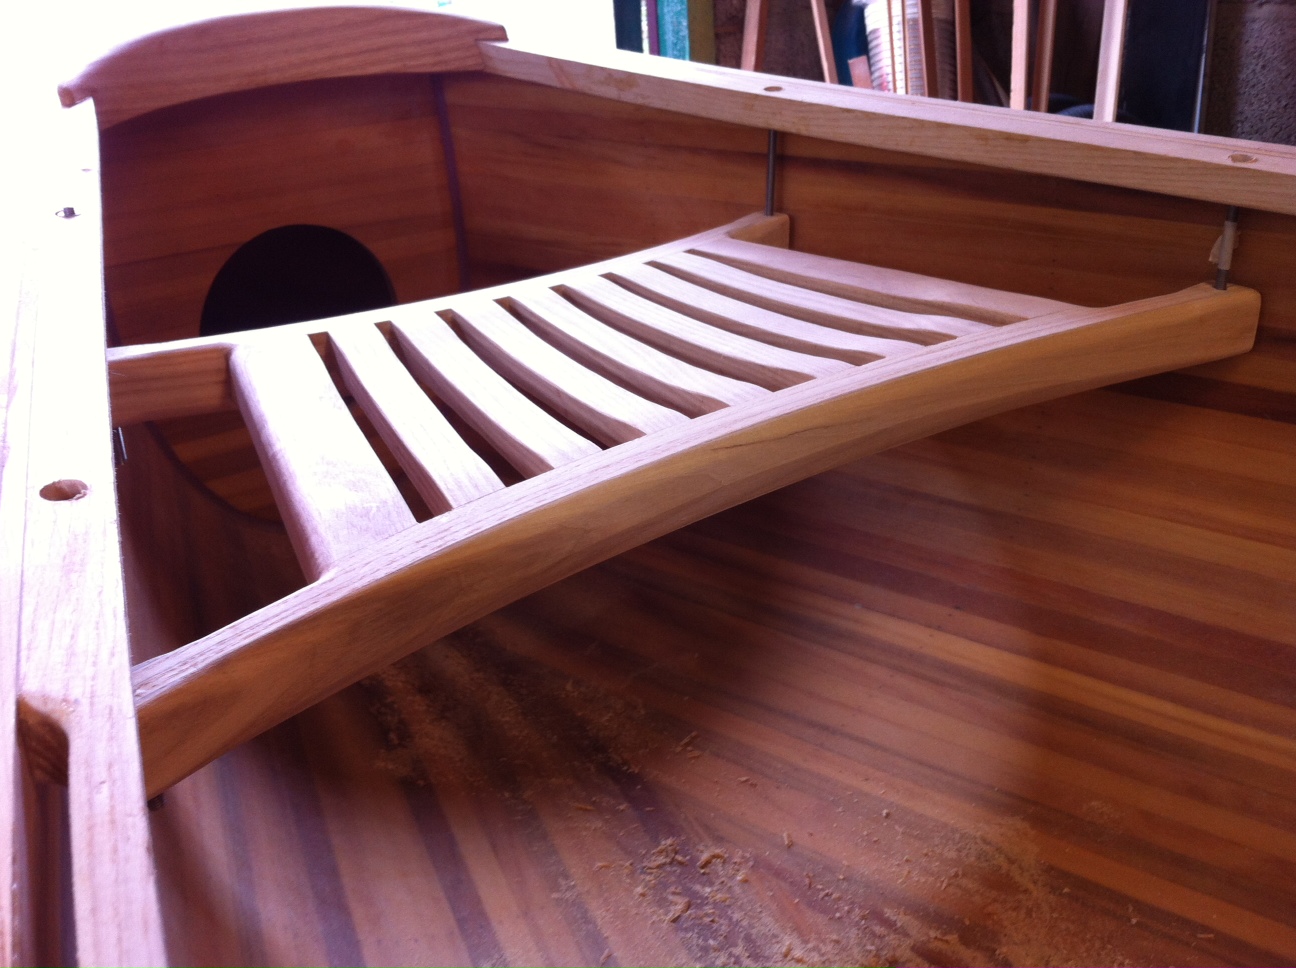 The bulkheads are 5mm elite ply with cedar strip on one face. They 